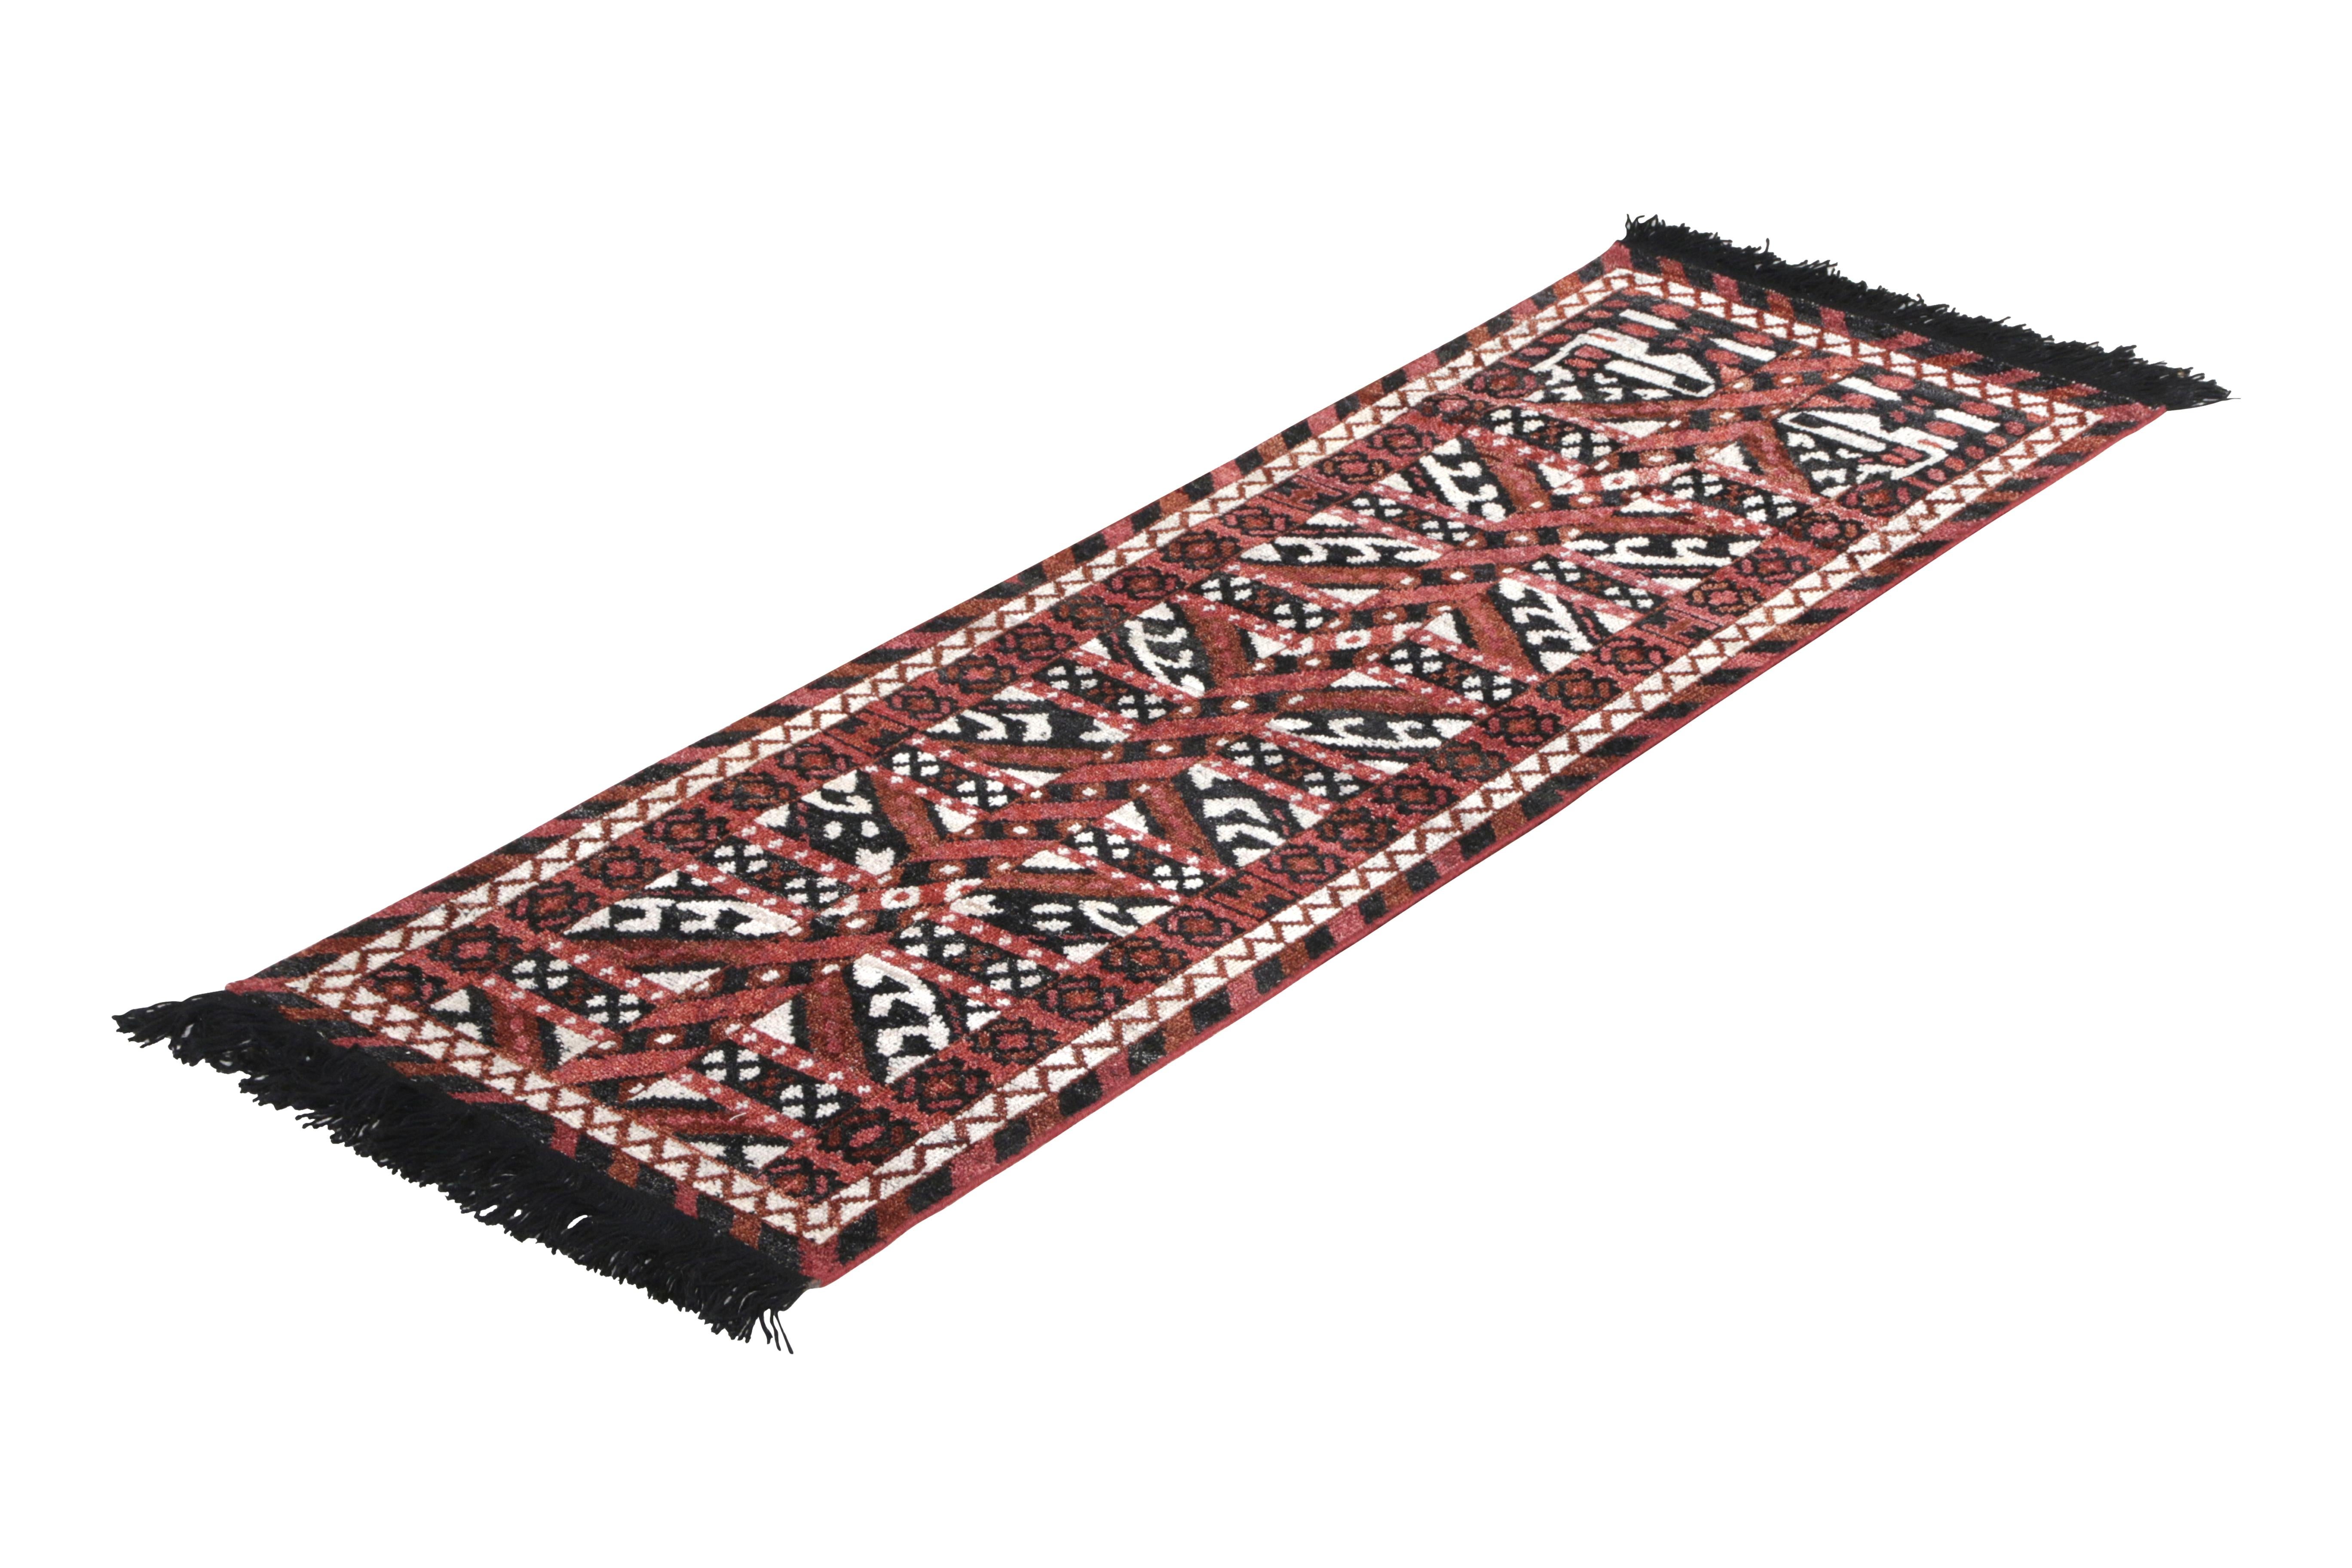 A custom rug design from the Burano Collection by Rug & Kilim, recapturing classic inspirations like that of the Ersari rug style seen in this 2 x 6 runner—particularly desirable for its narrow approach. Hand knotted in notably soft Ghazni wool and